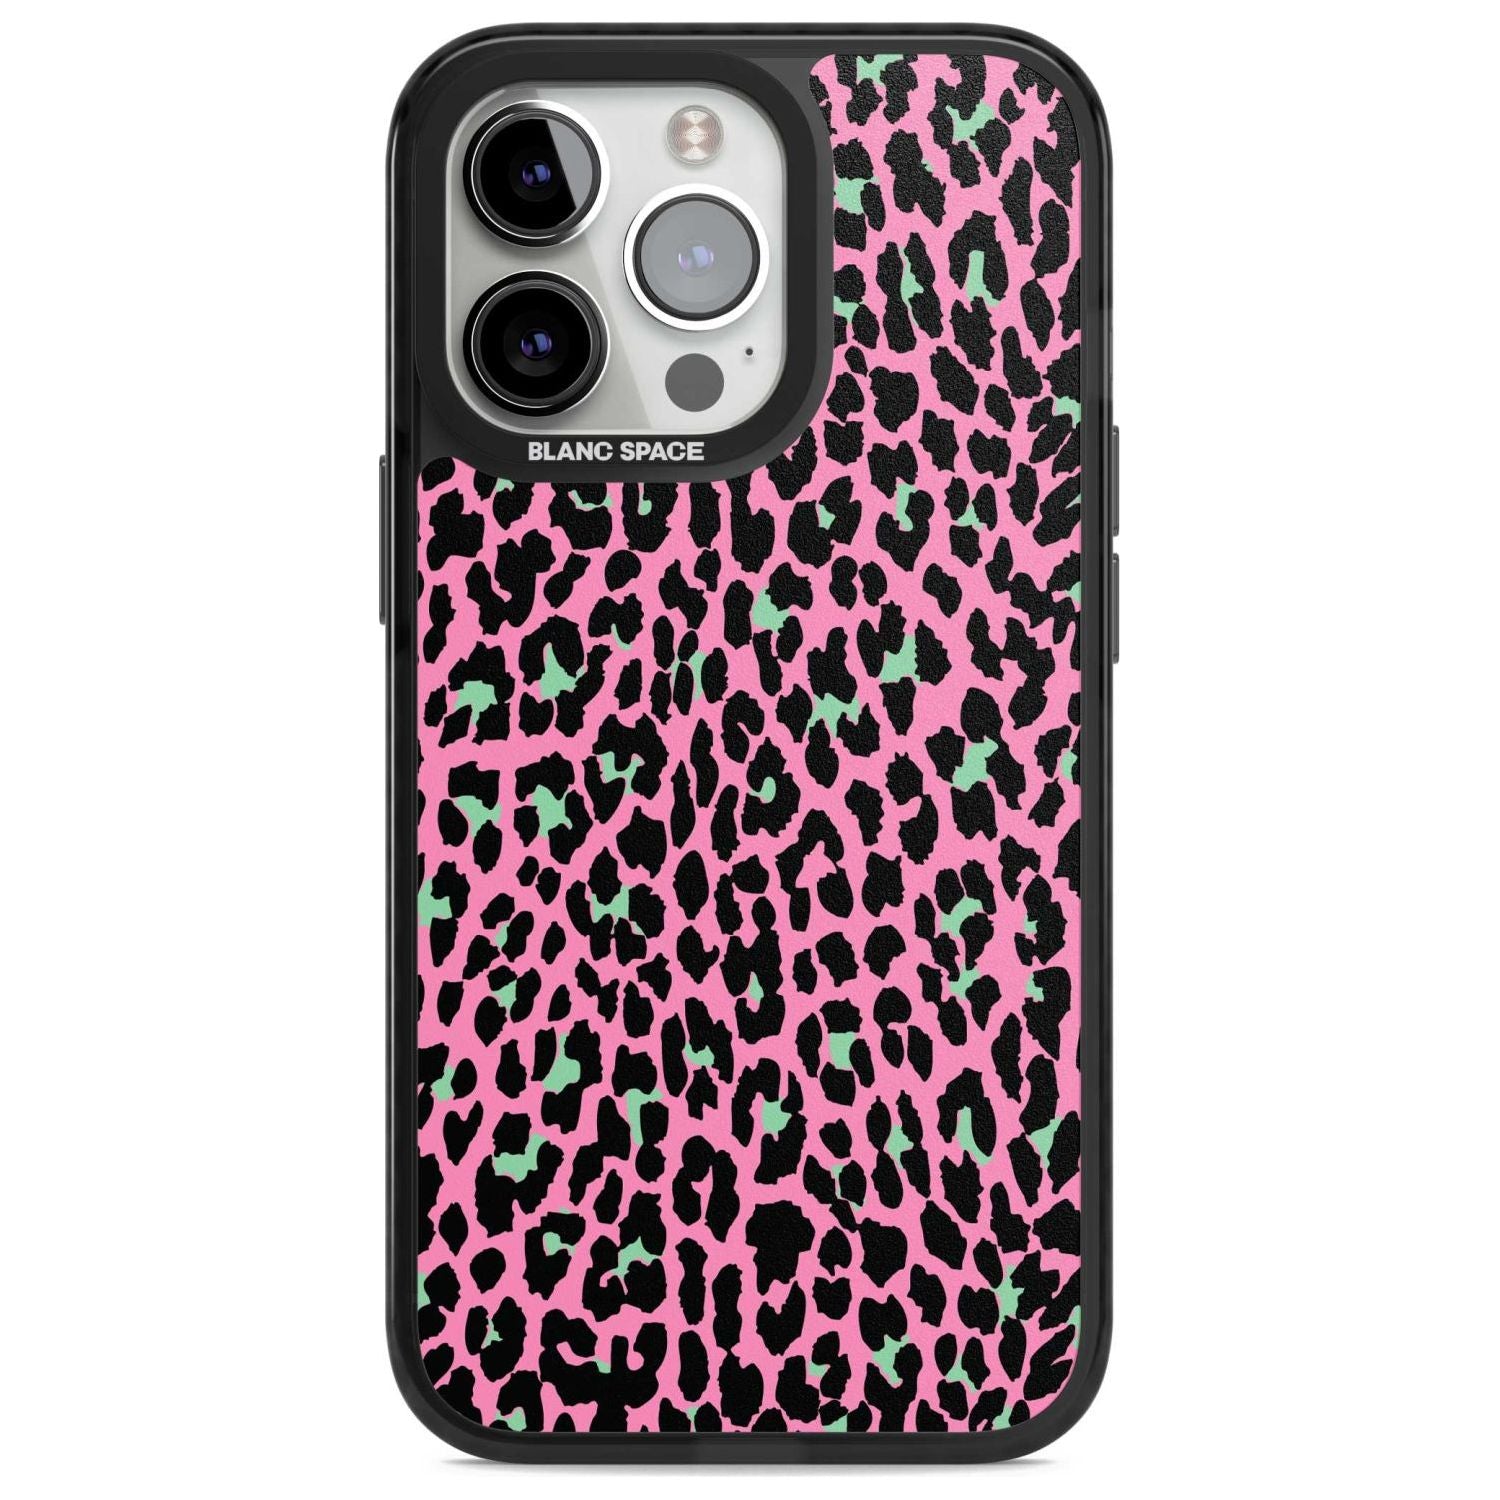 Green on Pink Leopard Print Pattern Phone Case iPhone 15 Pro Max / Magsafe Black Impact Case,iPhone 15 Pro / Magsafe Black Impact Case,iPhone 14 Pro Max / Magsafe Black Impact Case,iPhone 14 Pro / Magsafe Black Impact Case,iPhone 13 Pro / Magsafe Black Impact Case Blanc Space